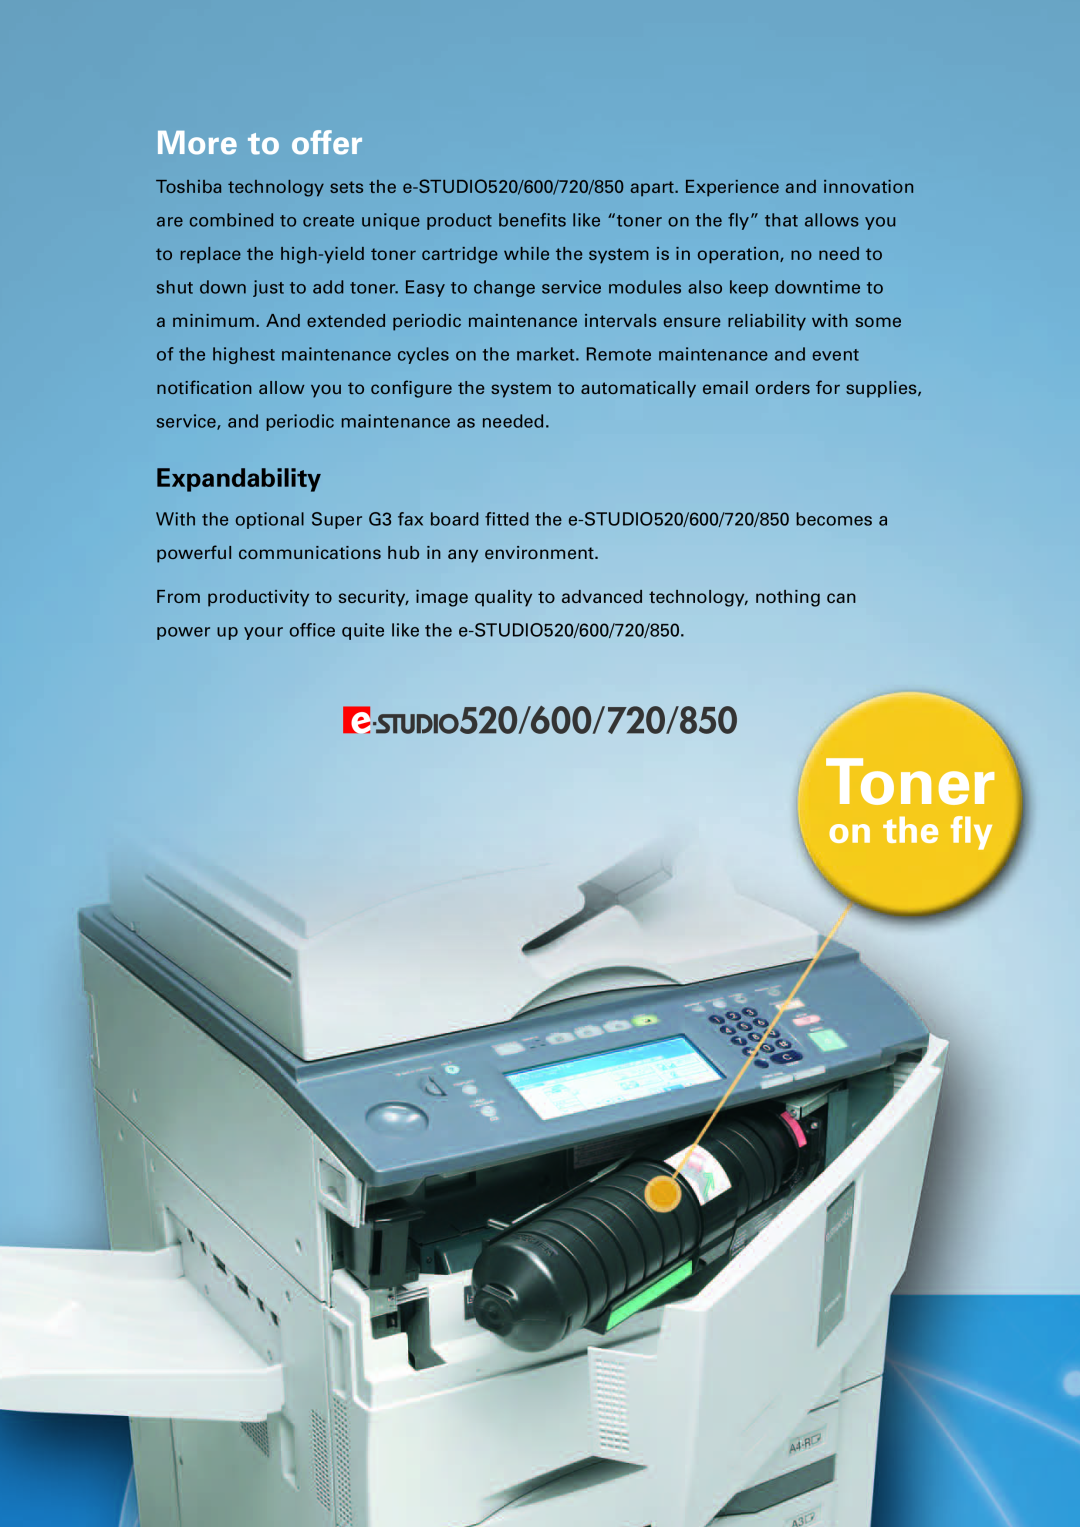 Toshiba 600, 720, 520, 850 manual More to offer, Toner, on the fly, Expandability 